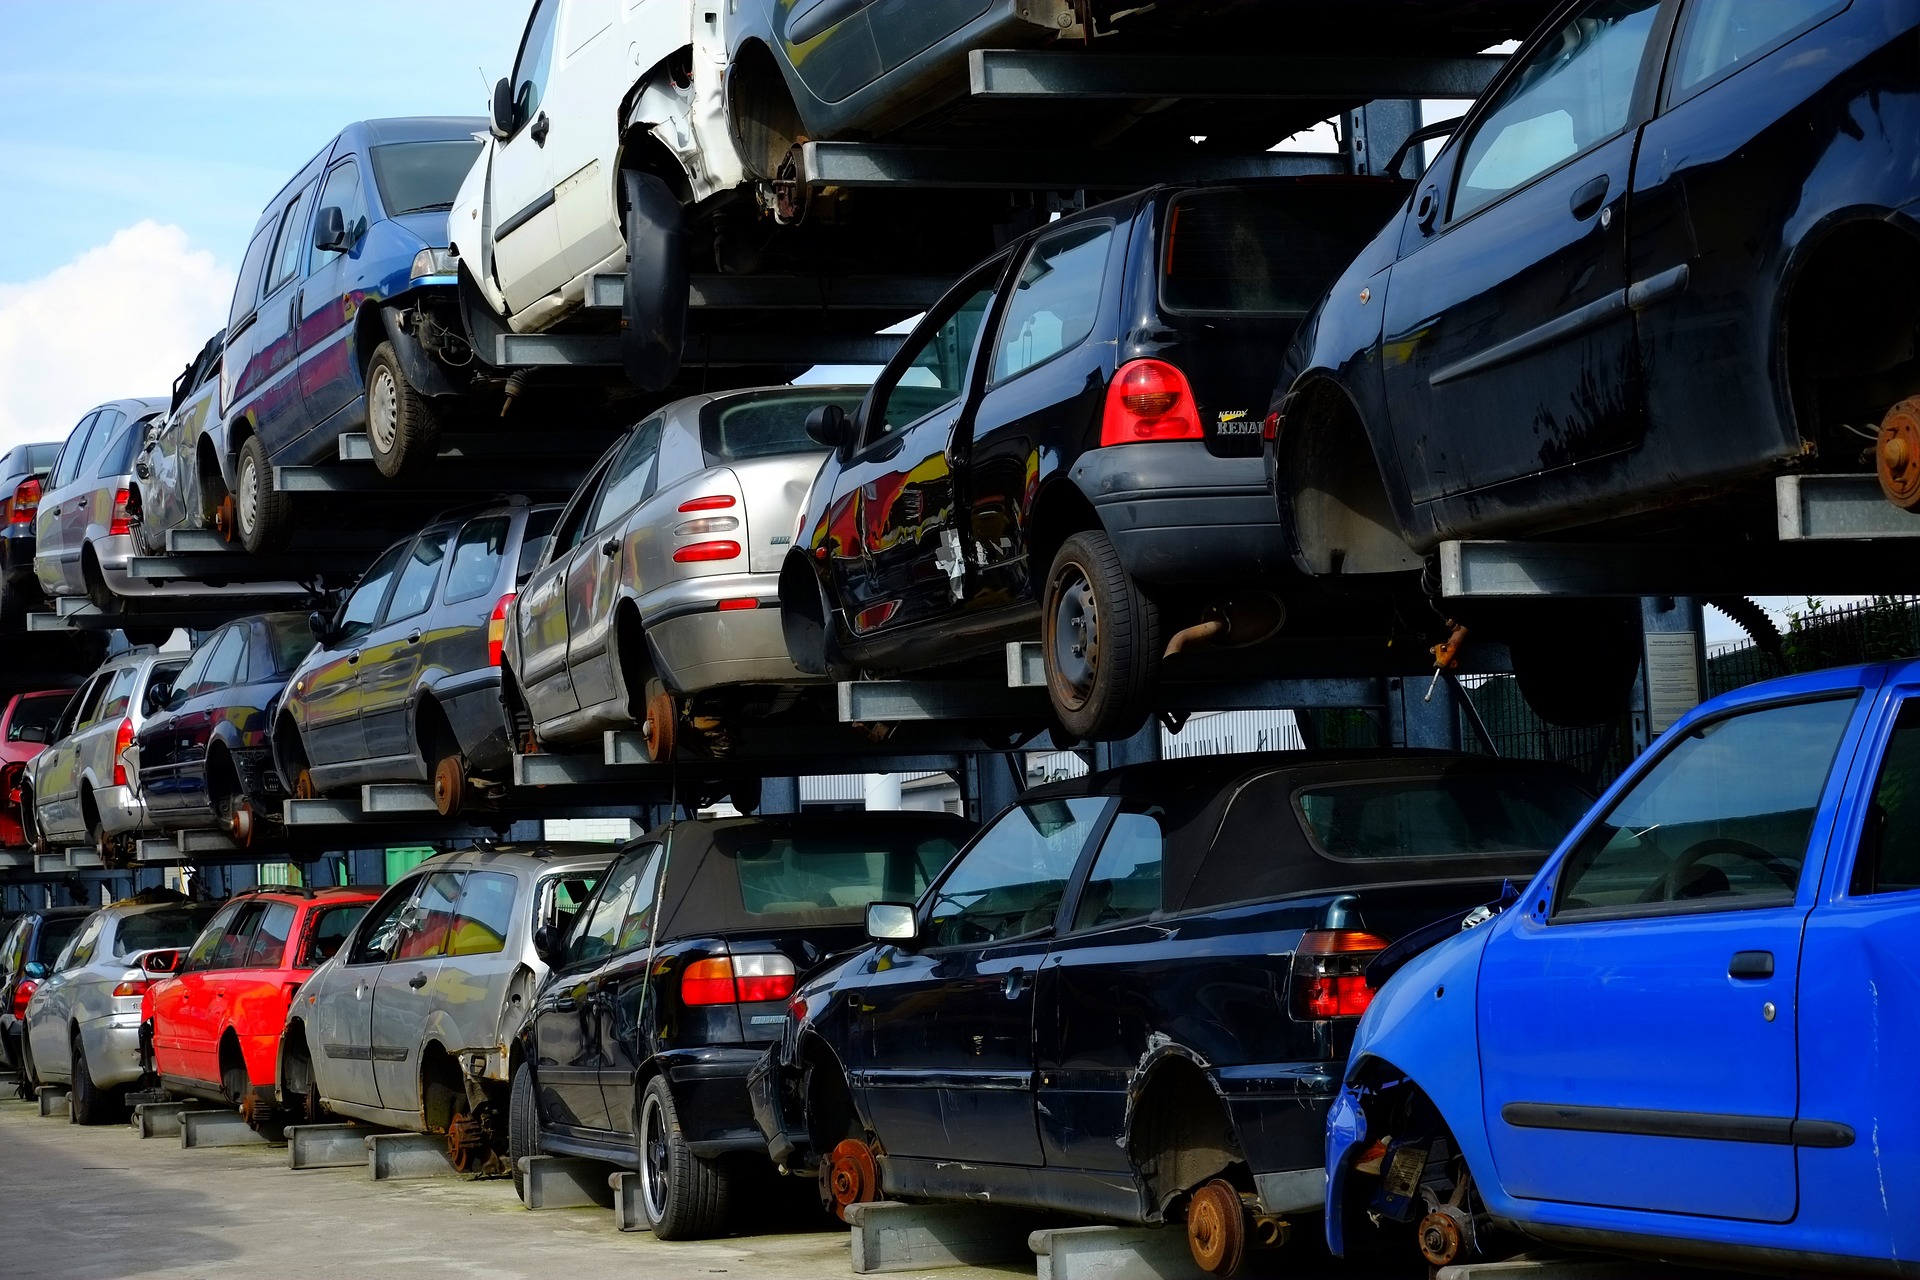 cars stacked in a scrapyard